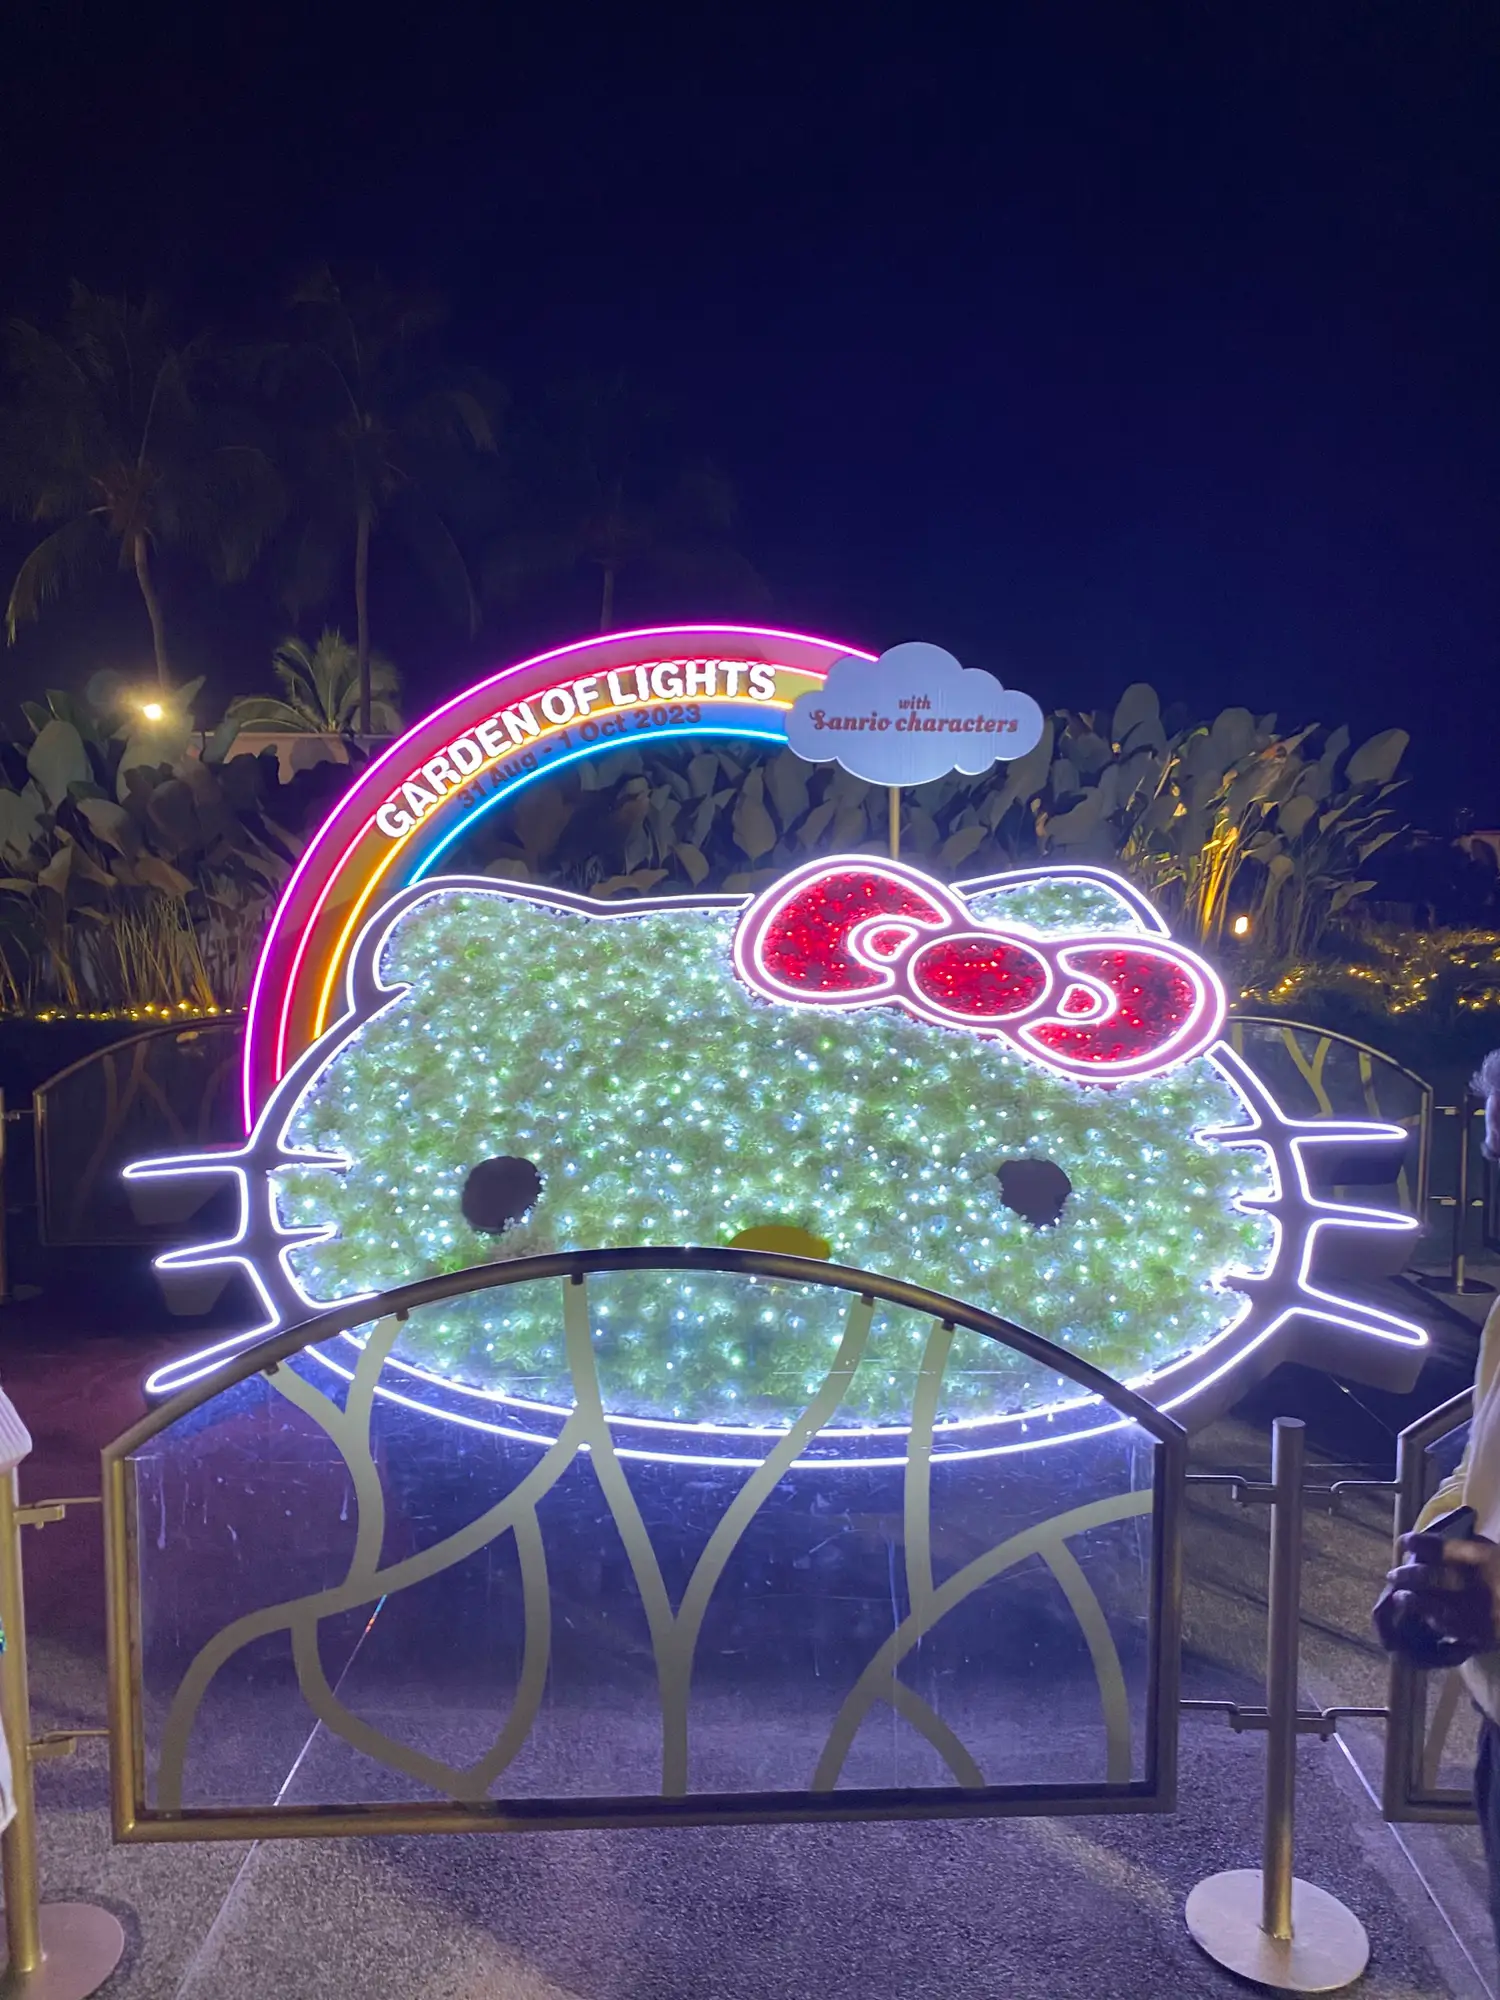 Garden of Lights With Sanrio Characters – Hello Kitty Lights At